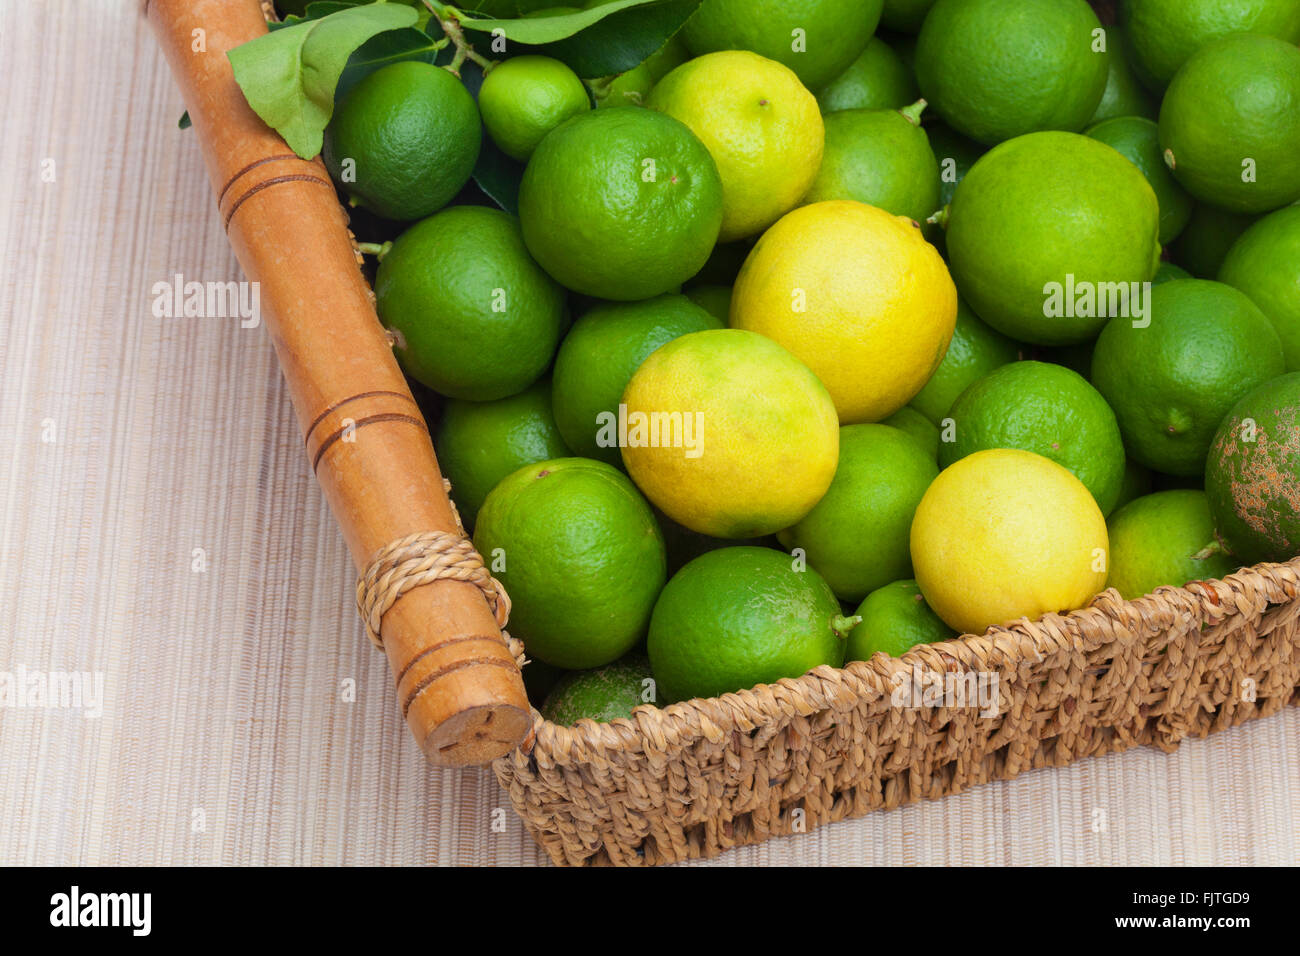 A basket of freshly picked key limes from a Florida garden Stock Photo